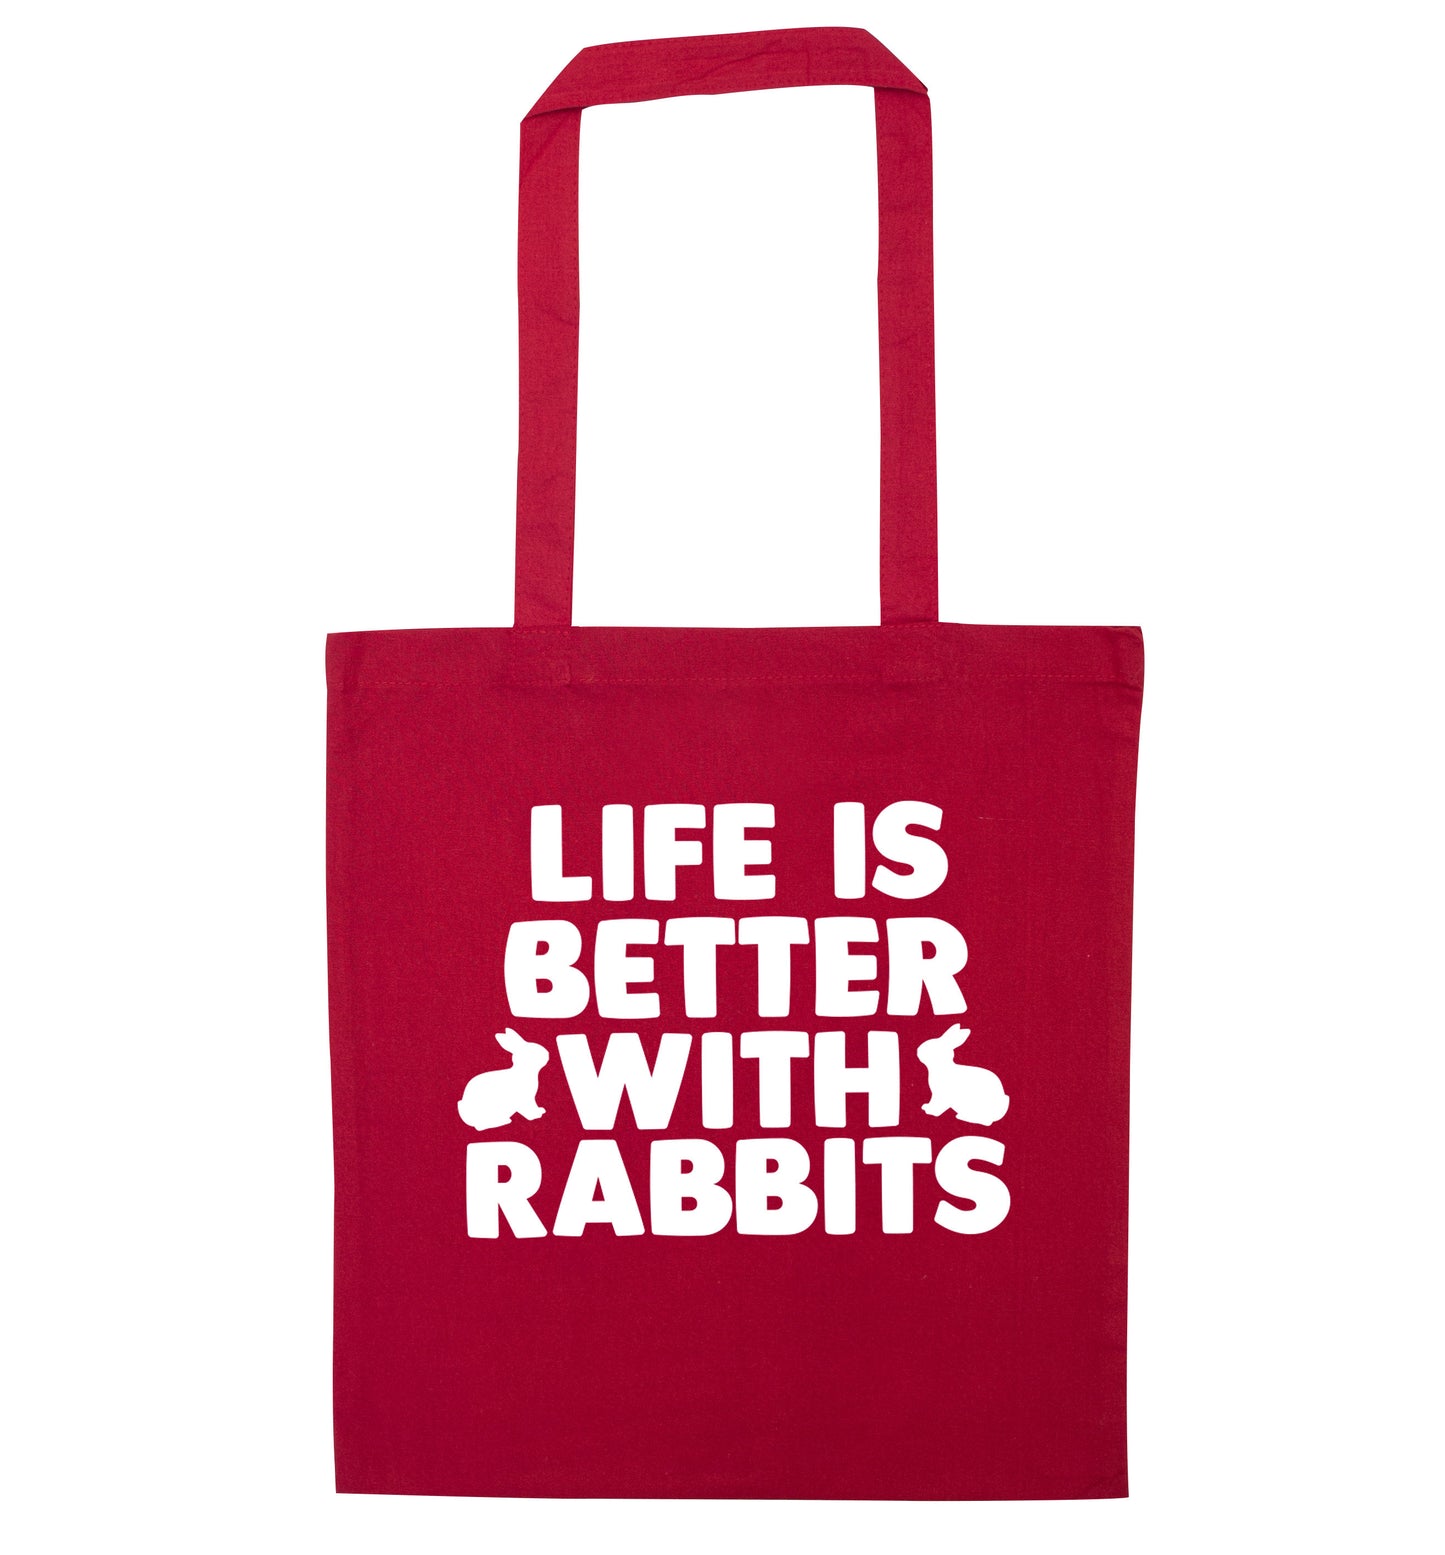 Life is better with rabbits red tote bag